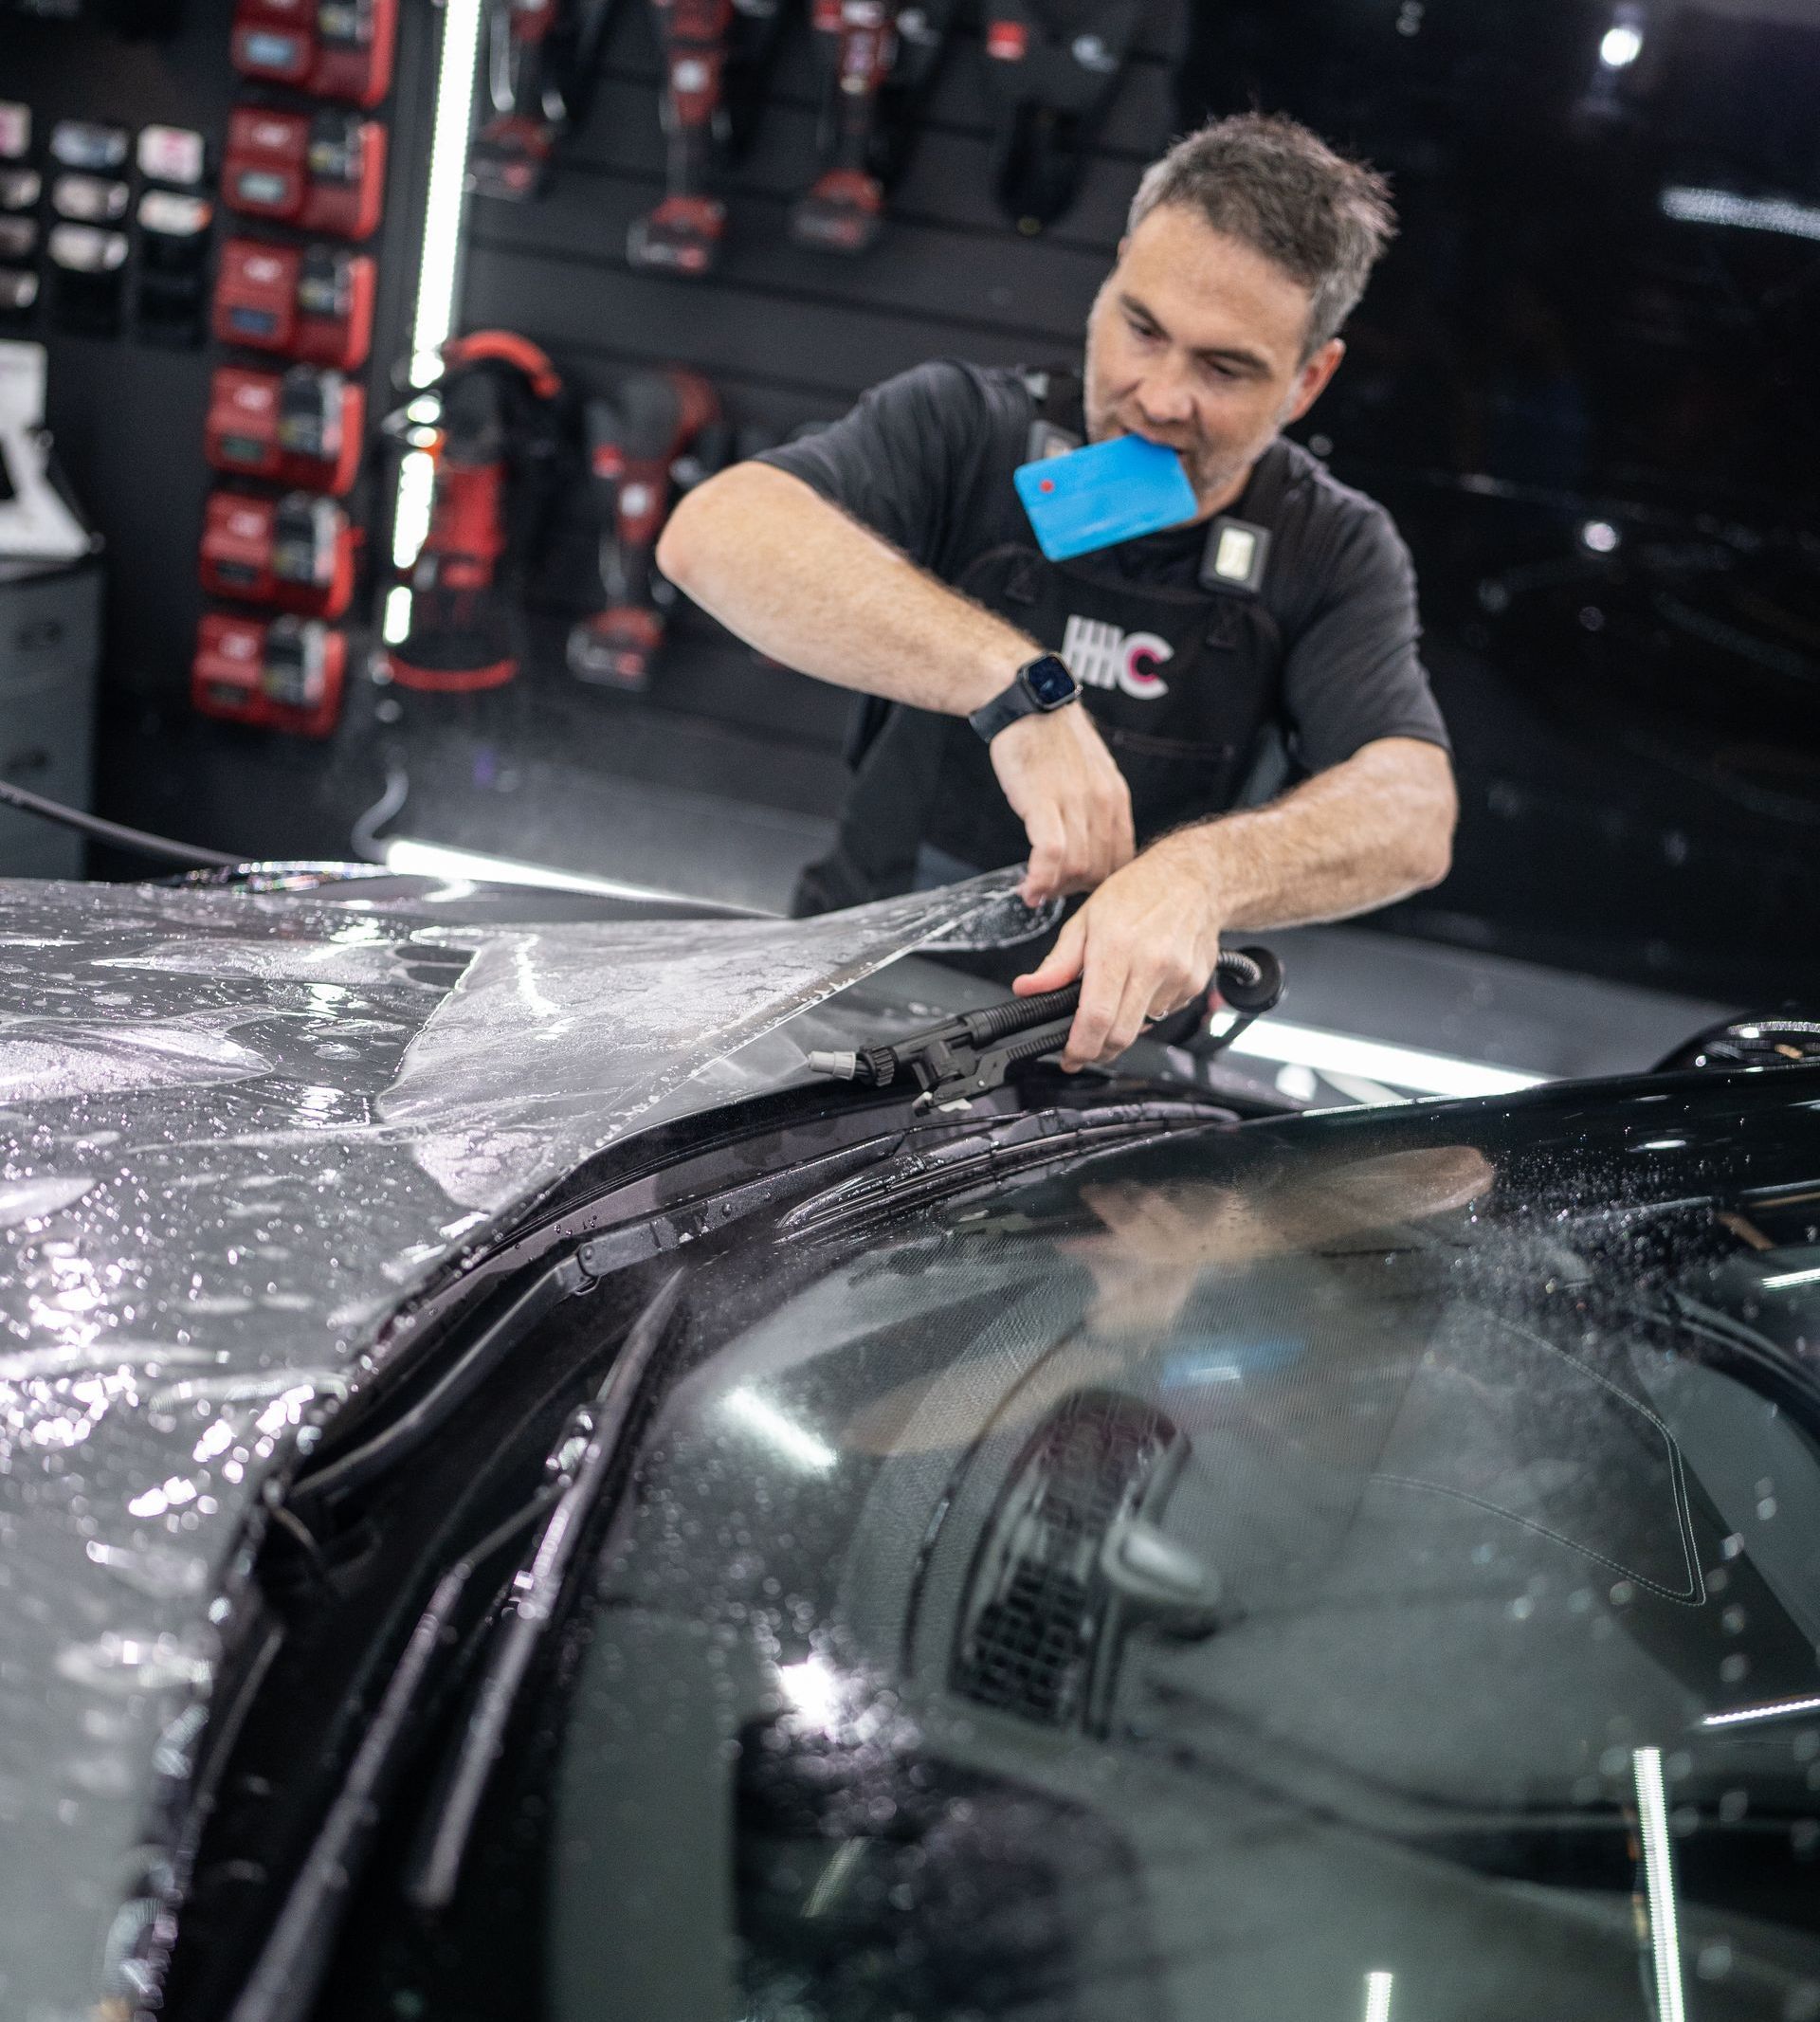 A man is cleaning the windshield of a car in a garage.